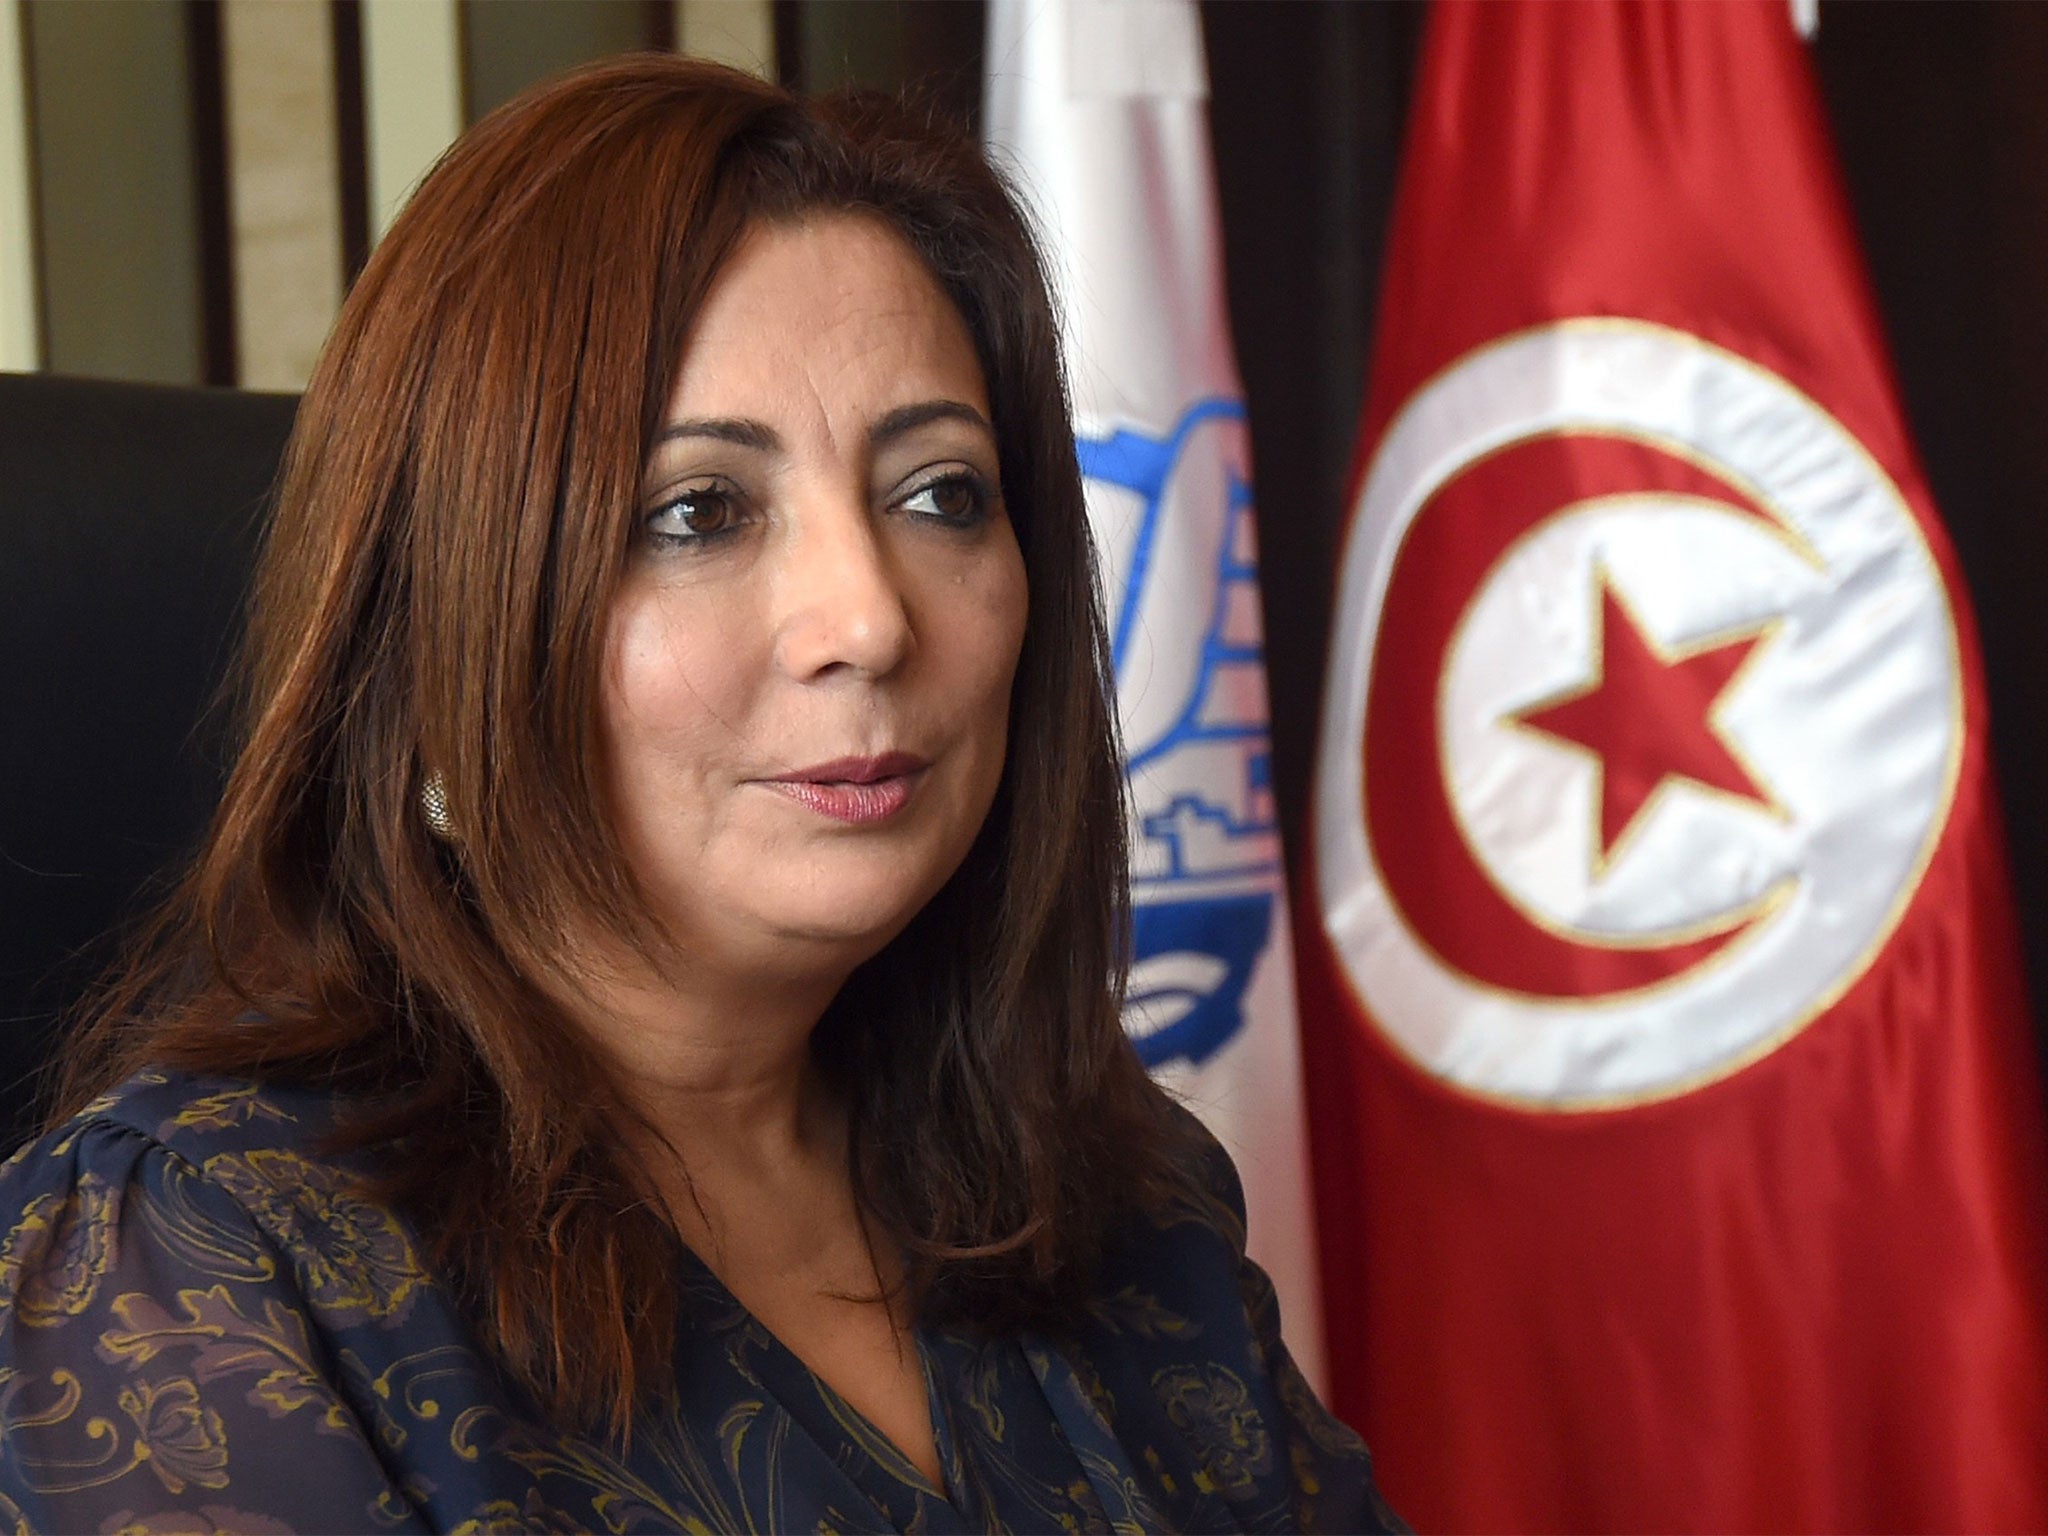 President of the Tunisian employers union (UTICA) Wided Bouchamaoui is a member of the Quartet